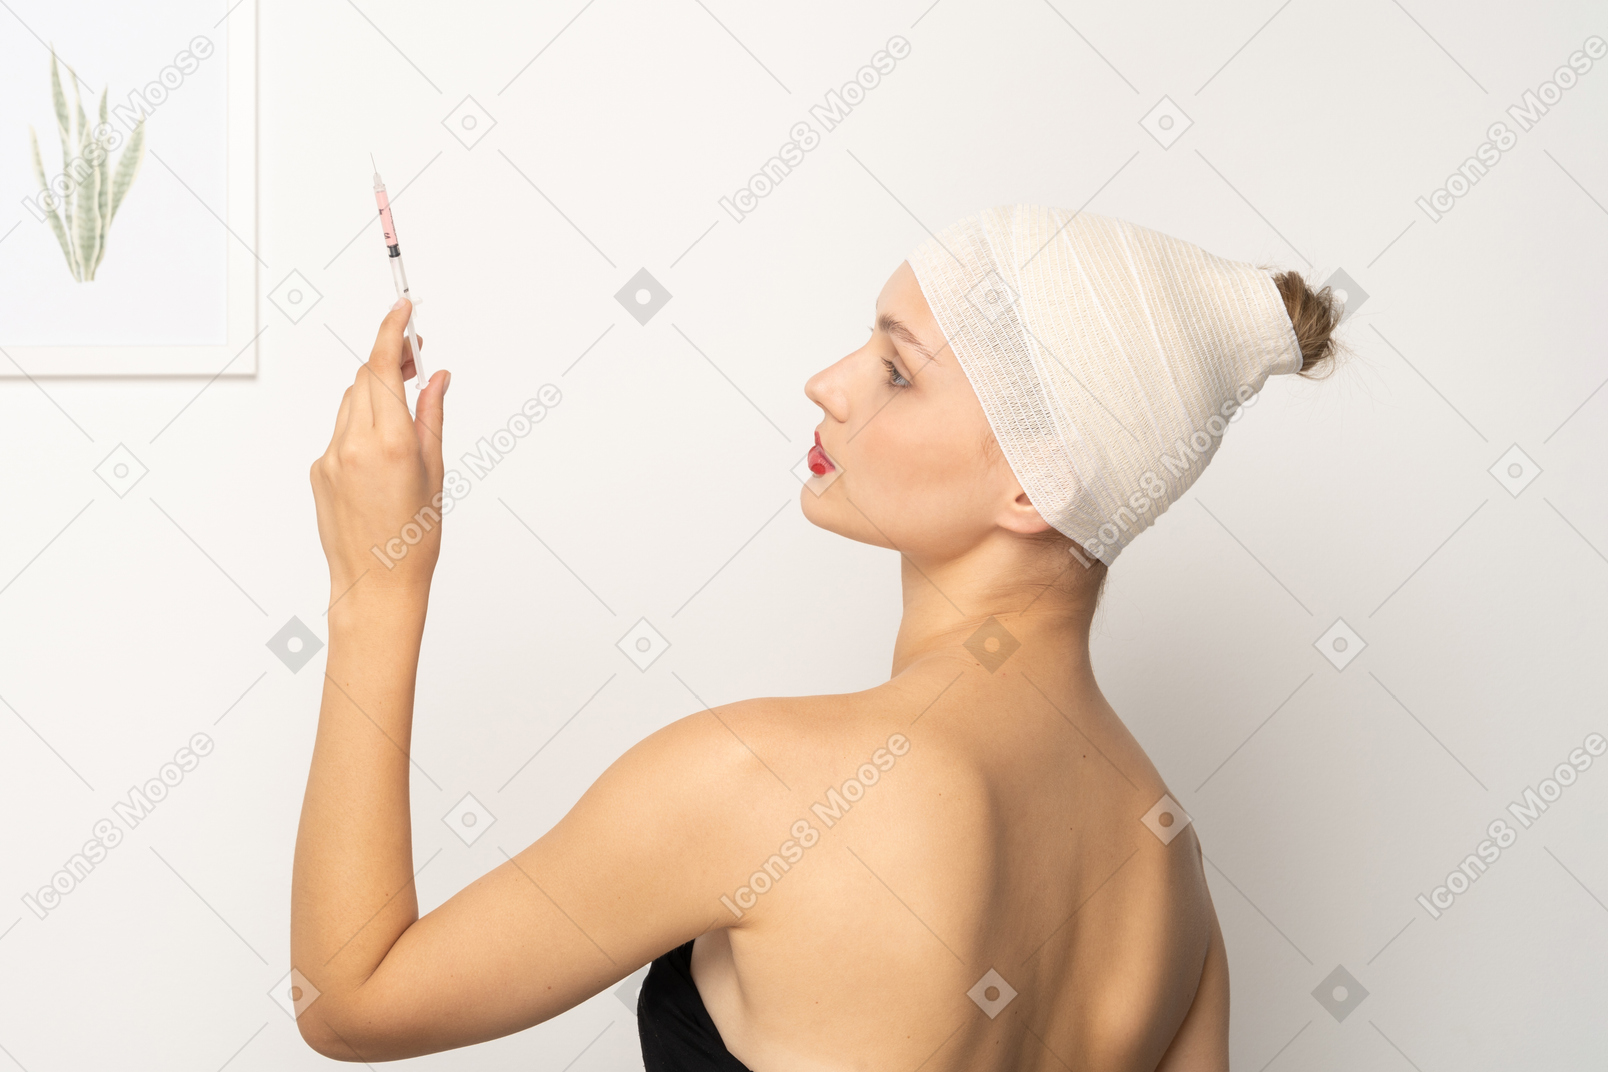 Side view of a young woman holding up syringe